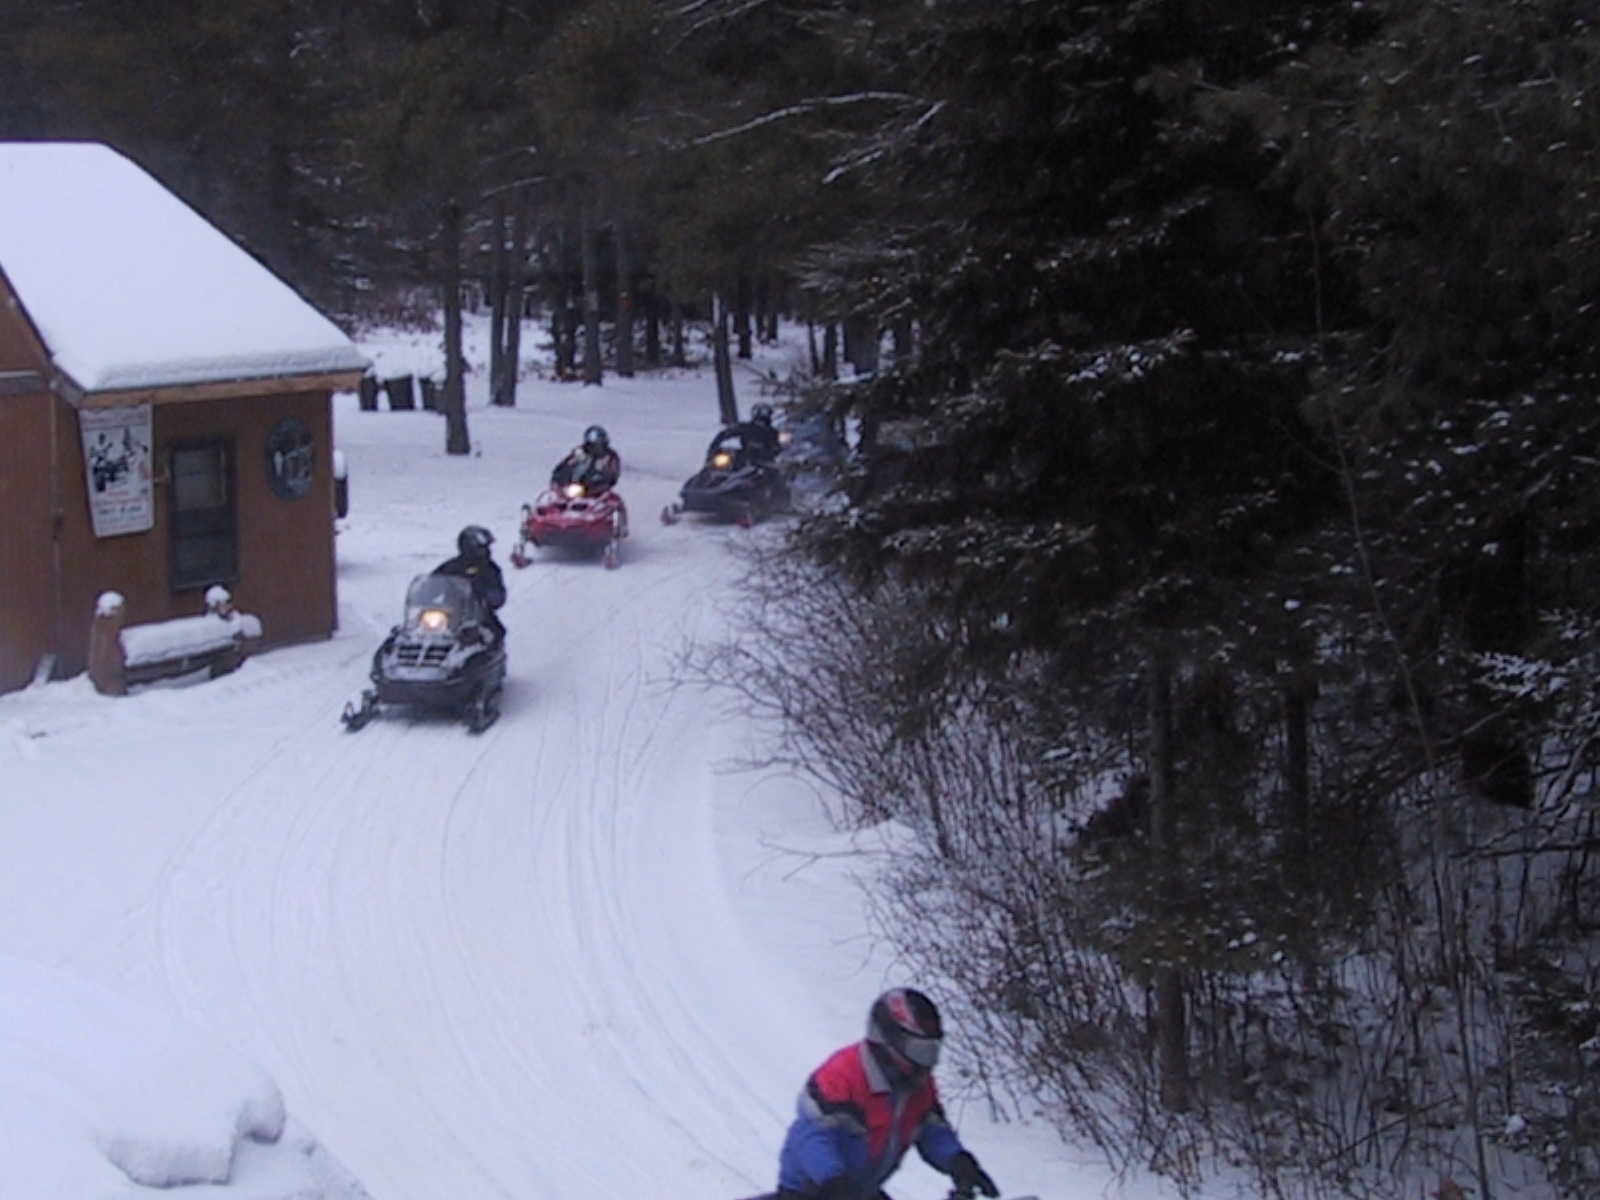 Snowmobiling with Rohr's in Northern Wisconsin's Vilas County